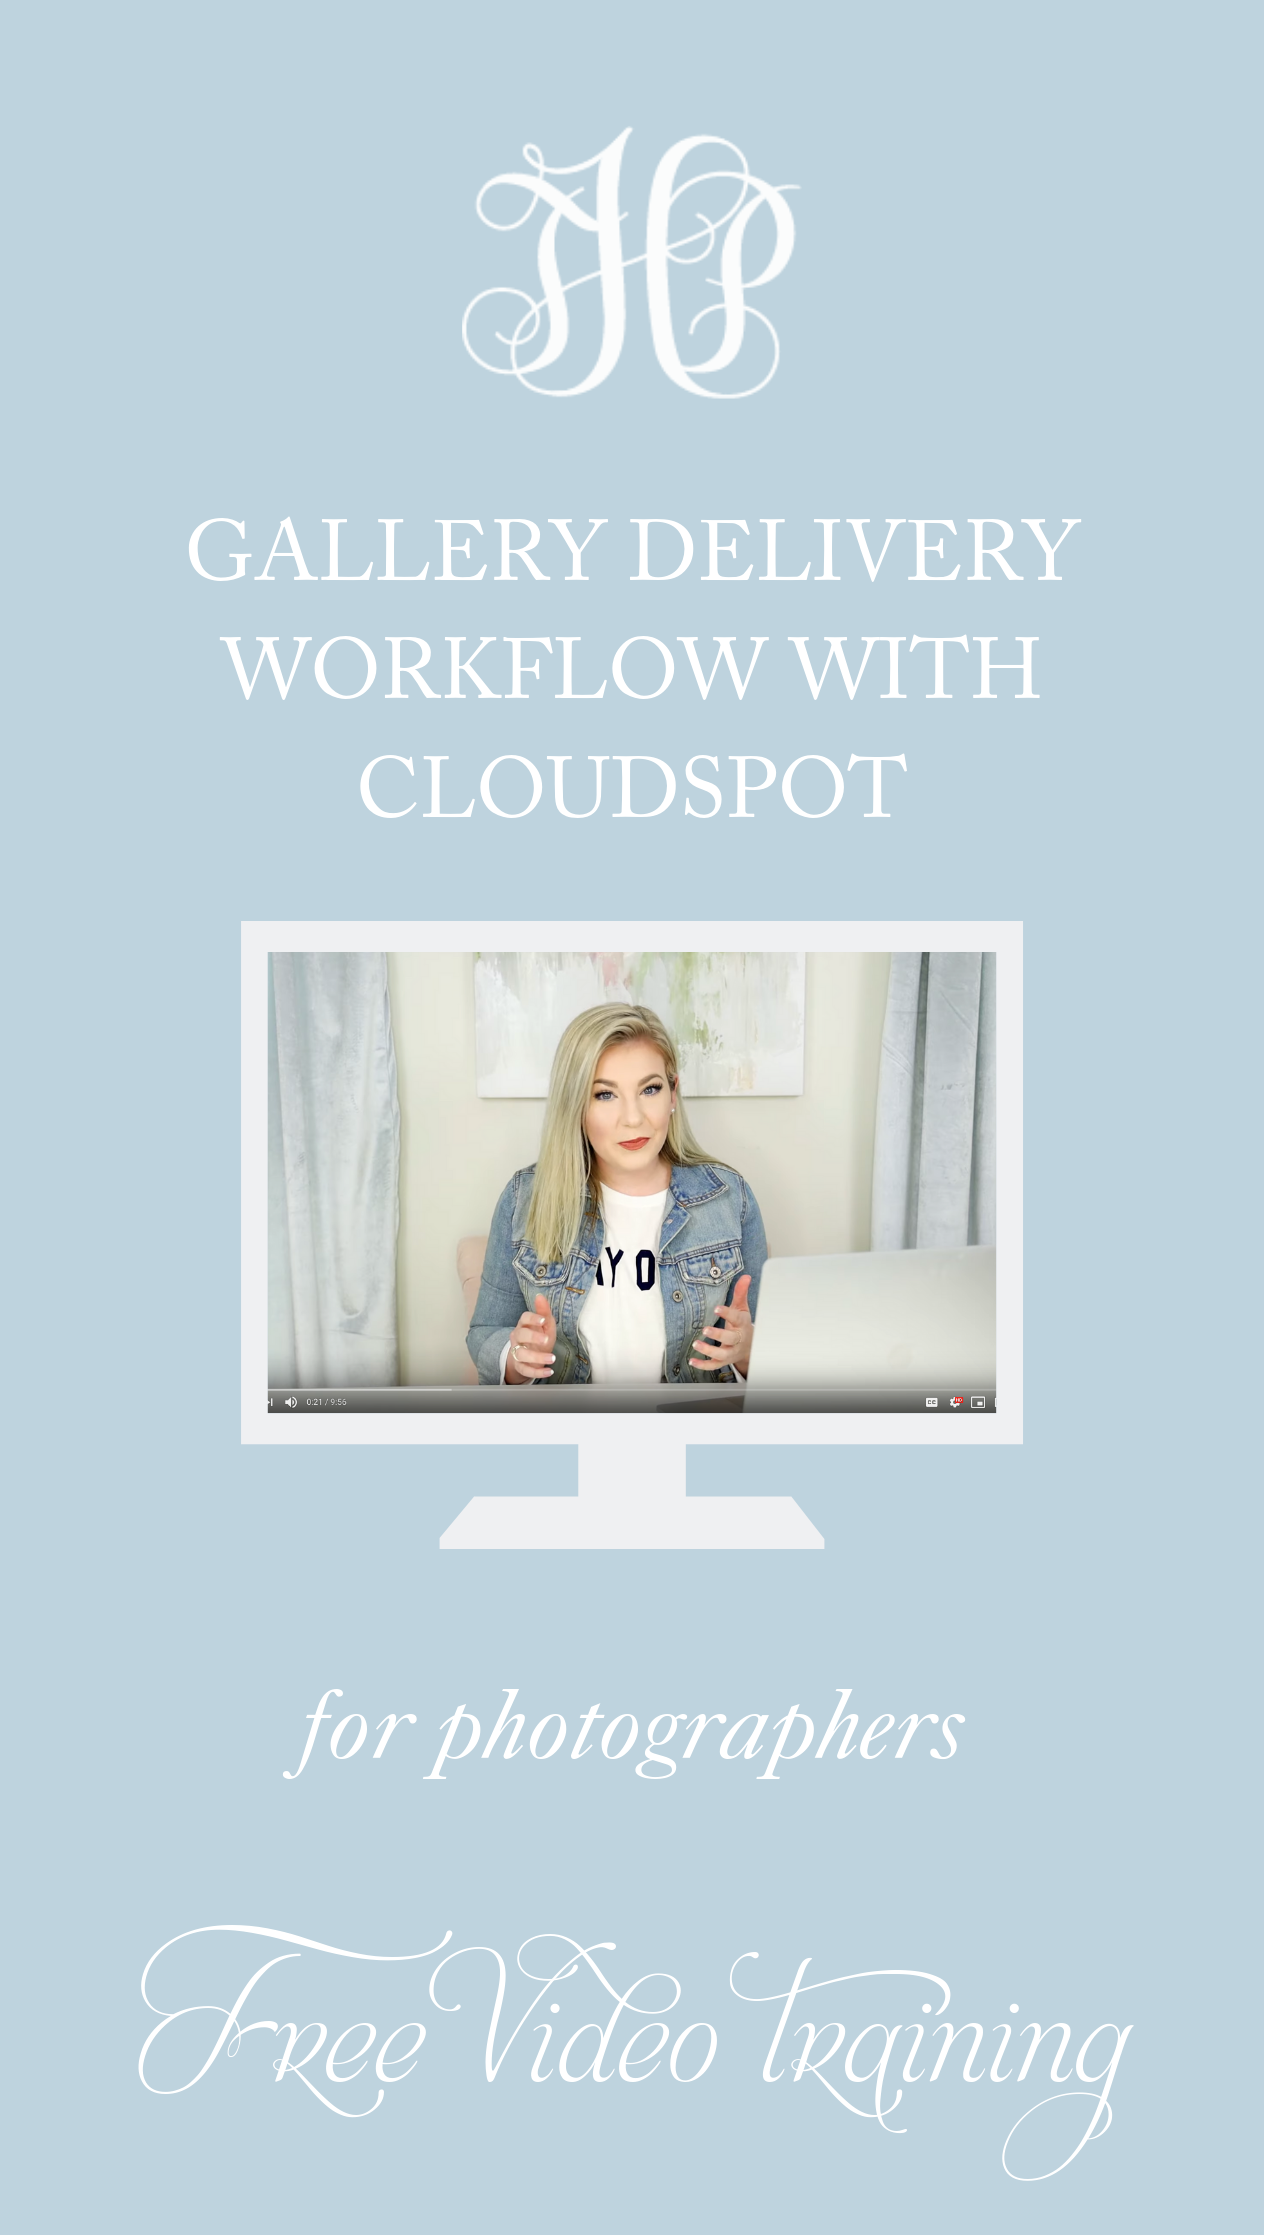 Gallery Delivery WorkFlow with Cloudspot | Happy Hour with Hope Episode #3